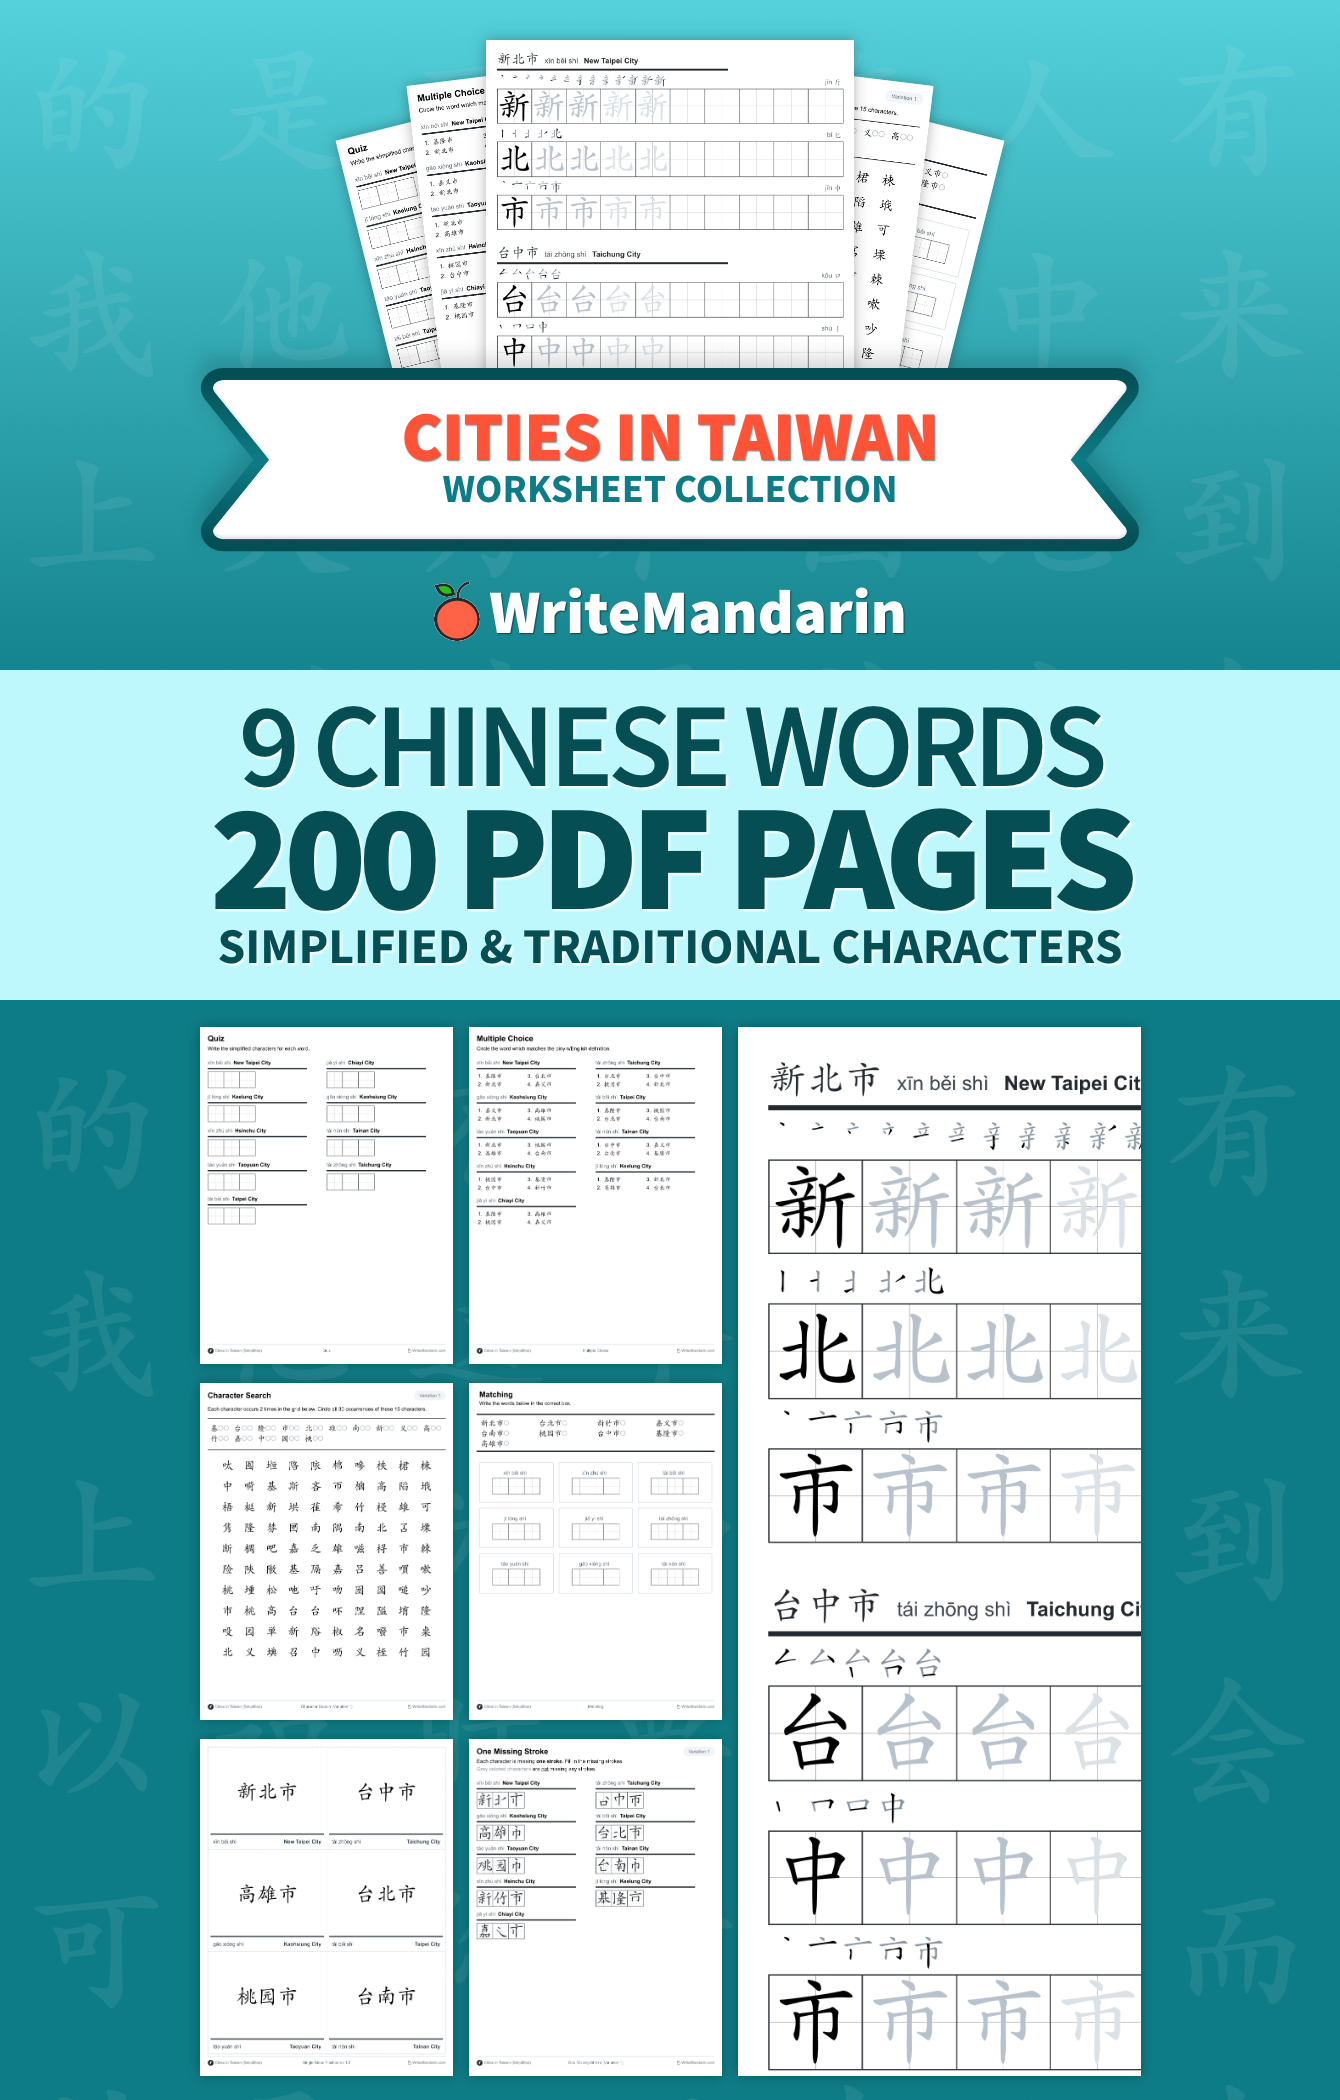 Preview image of Cities in Taiwan worksheet collection